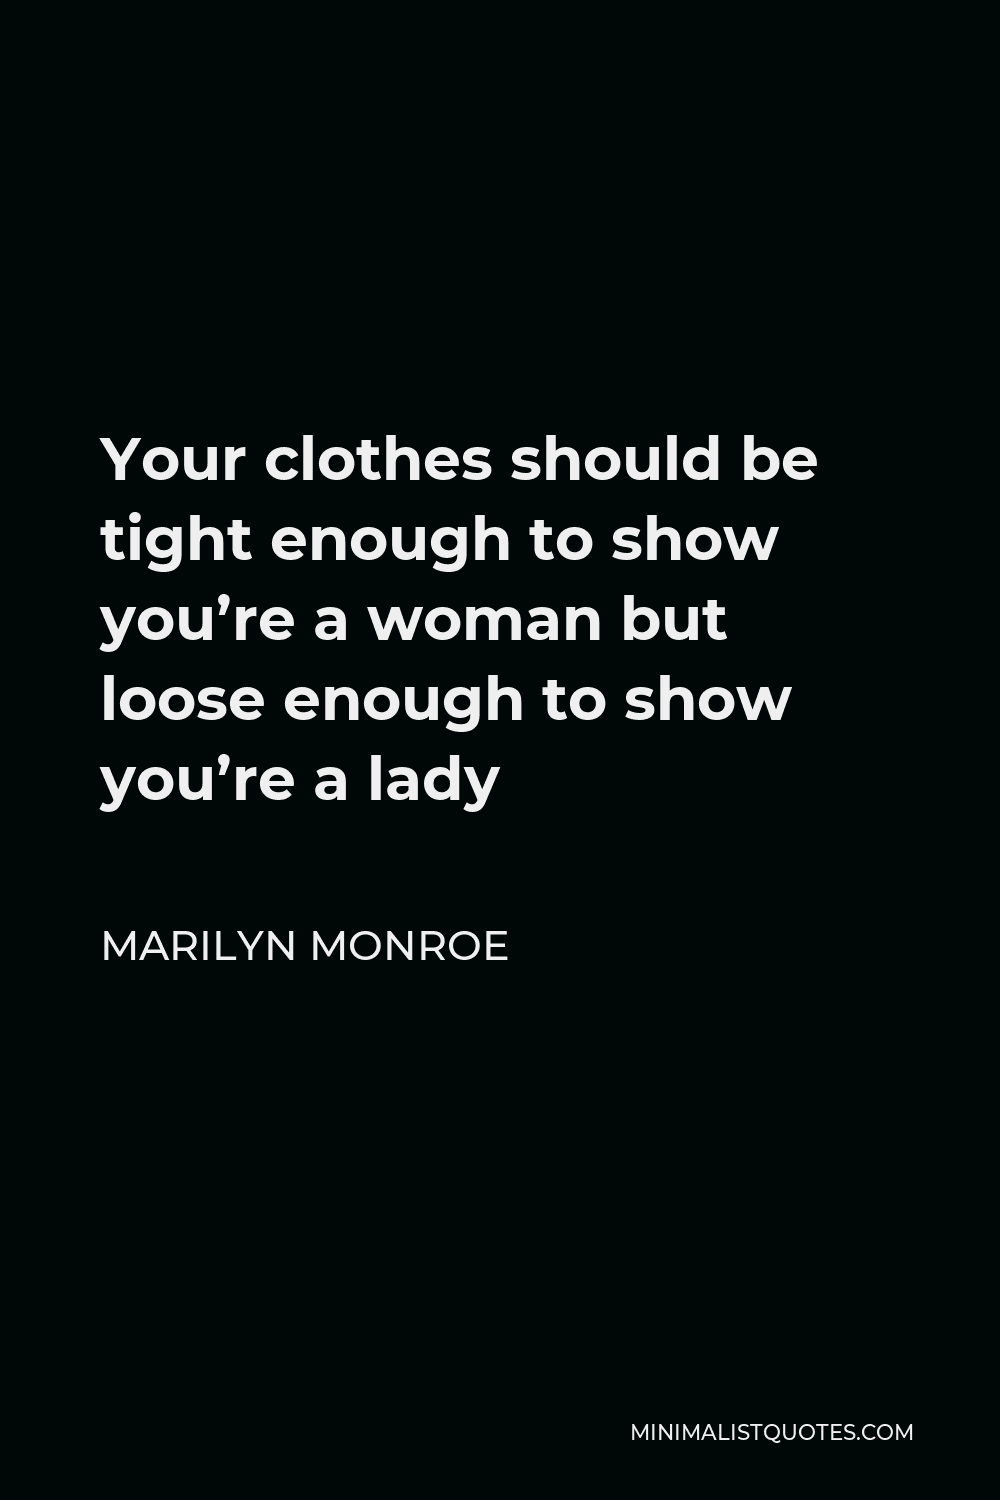 Marilyn Monroe Quote - Your clothes should be tight enough to show you’re a woman but loose enough to show you’re a lady